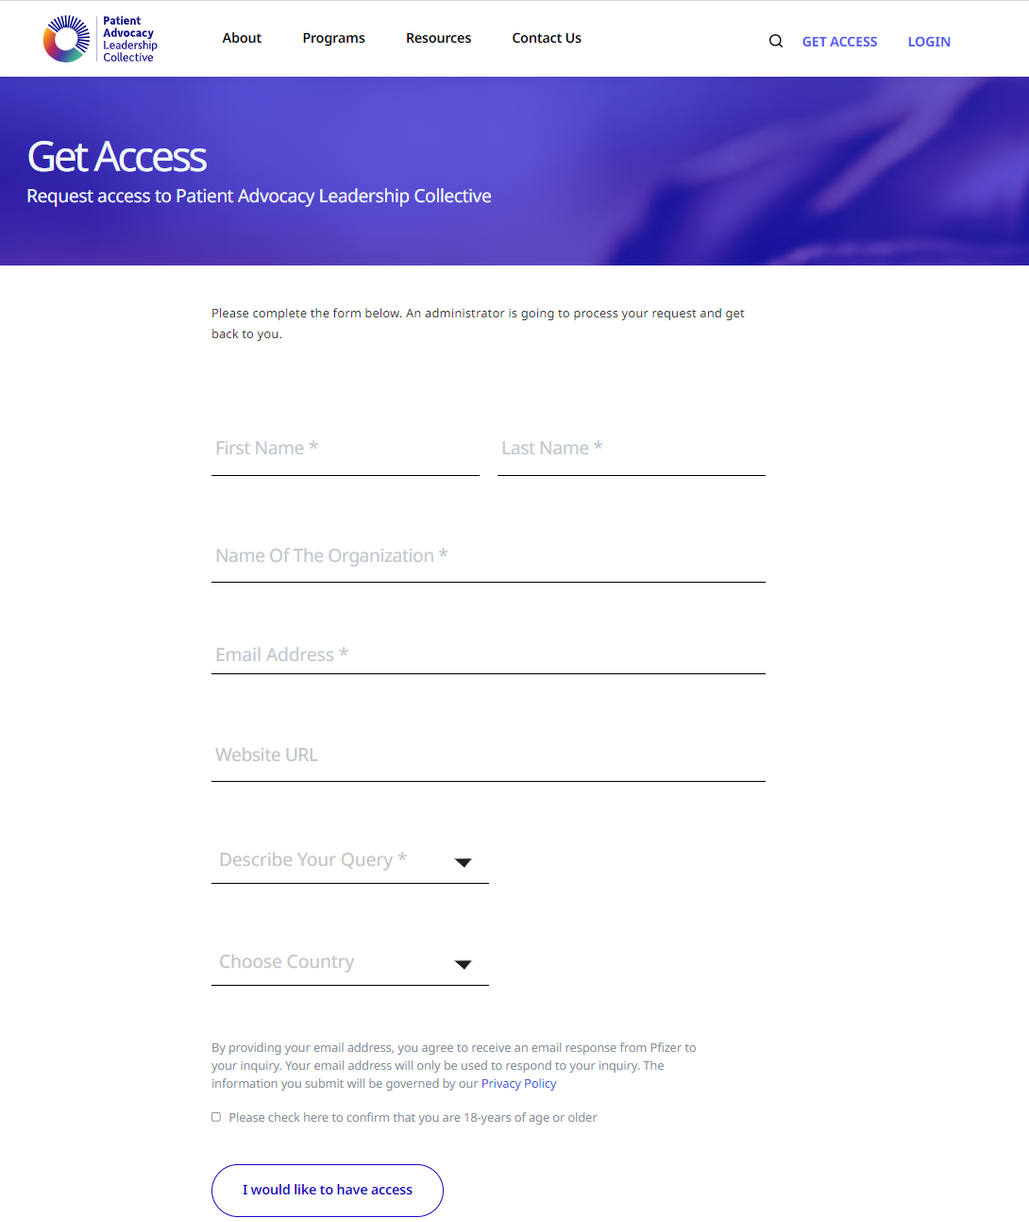 Get Access form